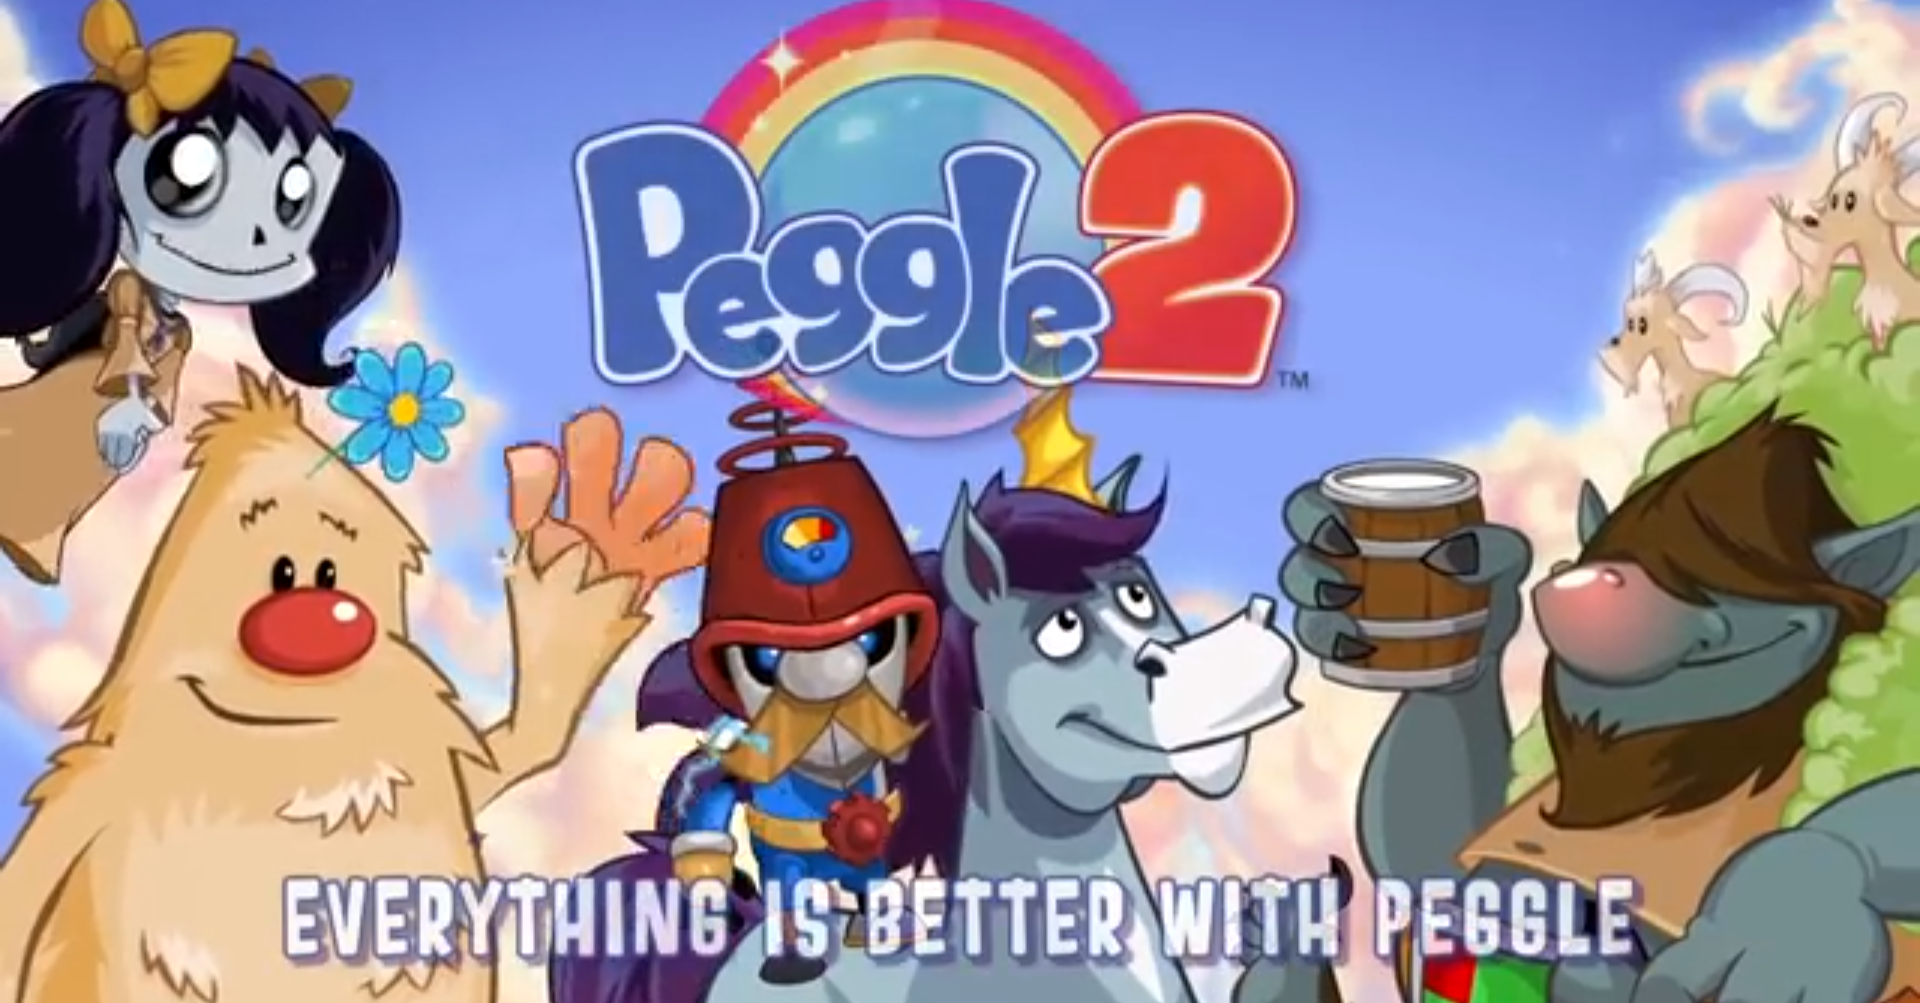 Meet The Five Masters Of Peggle In Launch Trailer To Celebrate